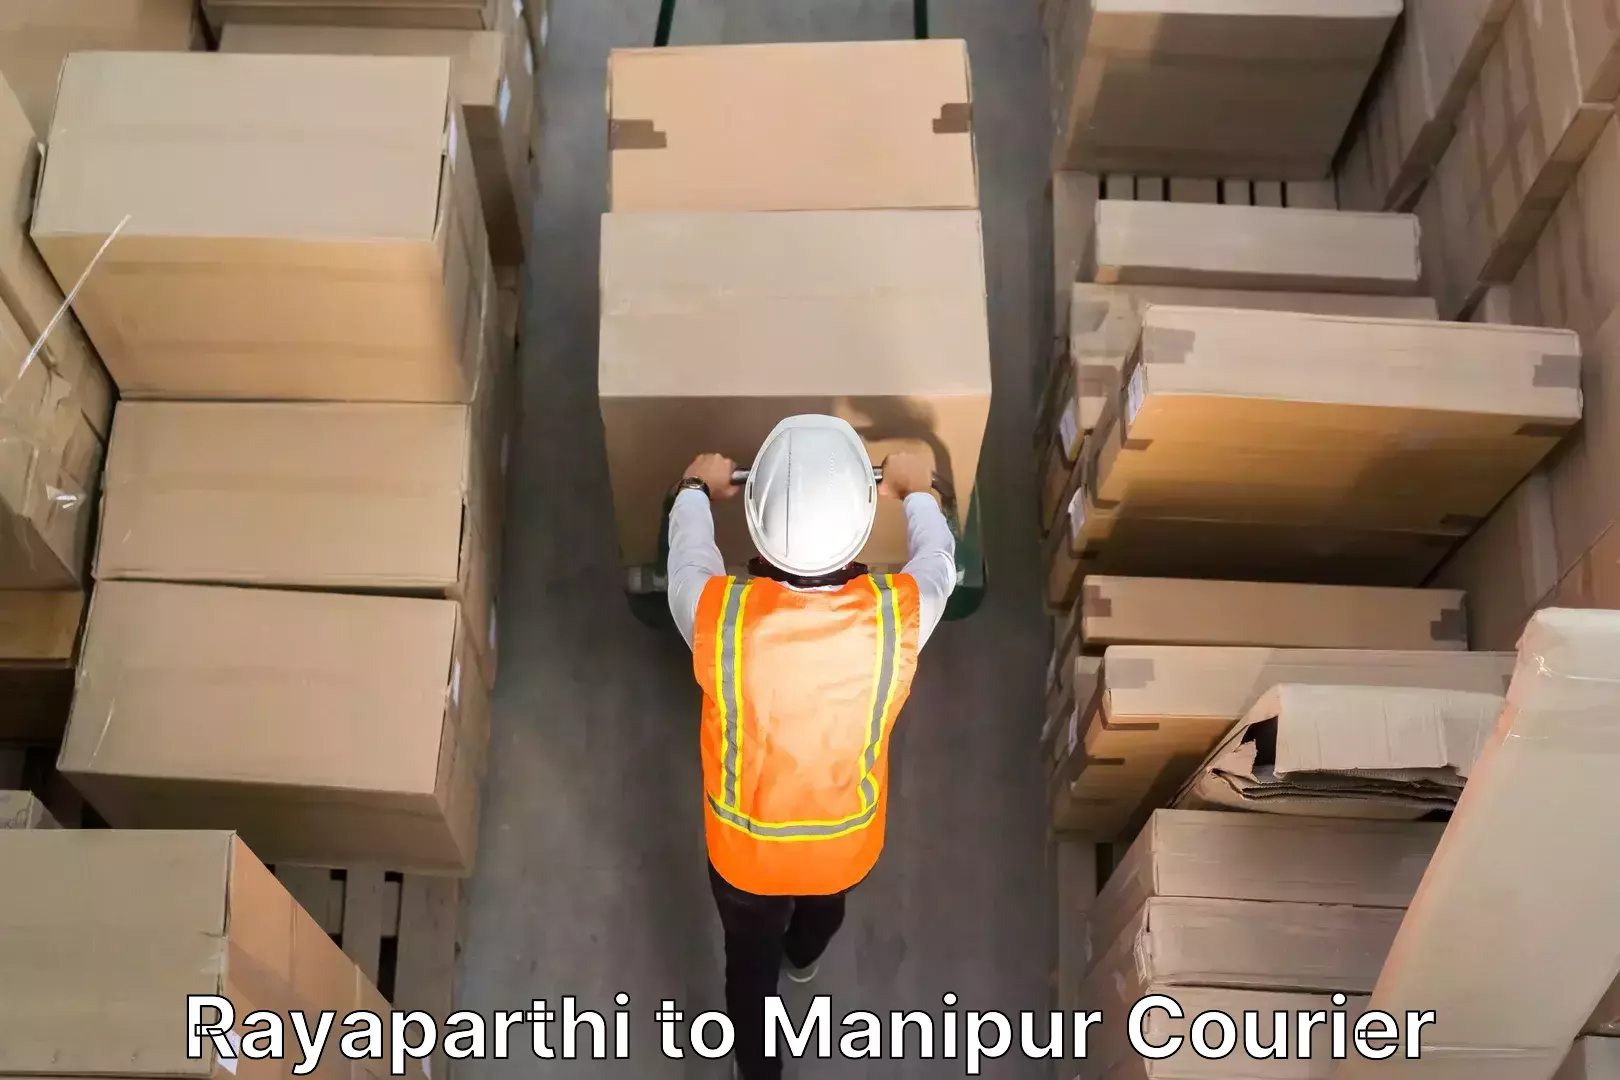 Furniture moving specialists Rayaparthi to Manipur